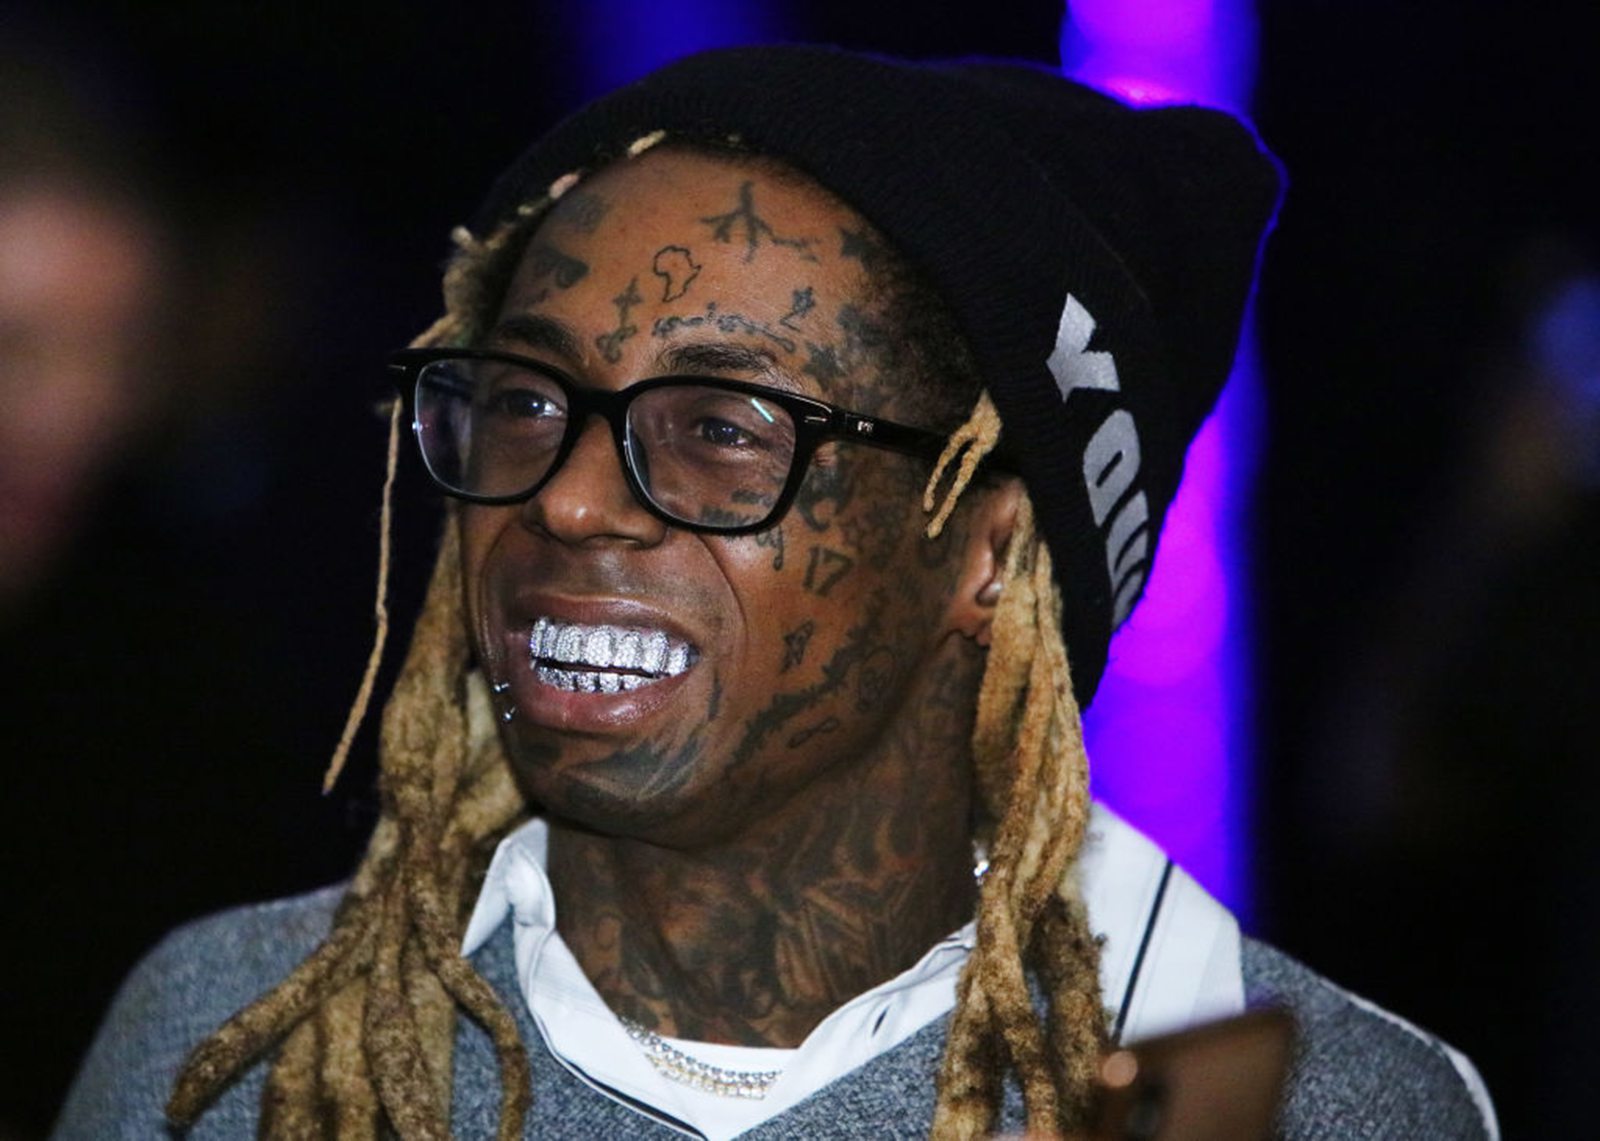 Lil Wayne's 'Welcome to Tha Carter' tour is coming to Fishtown